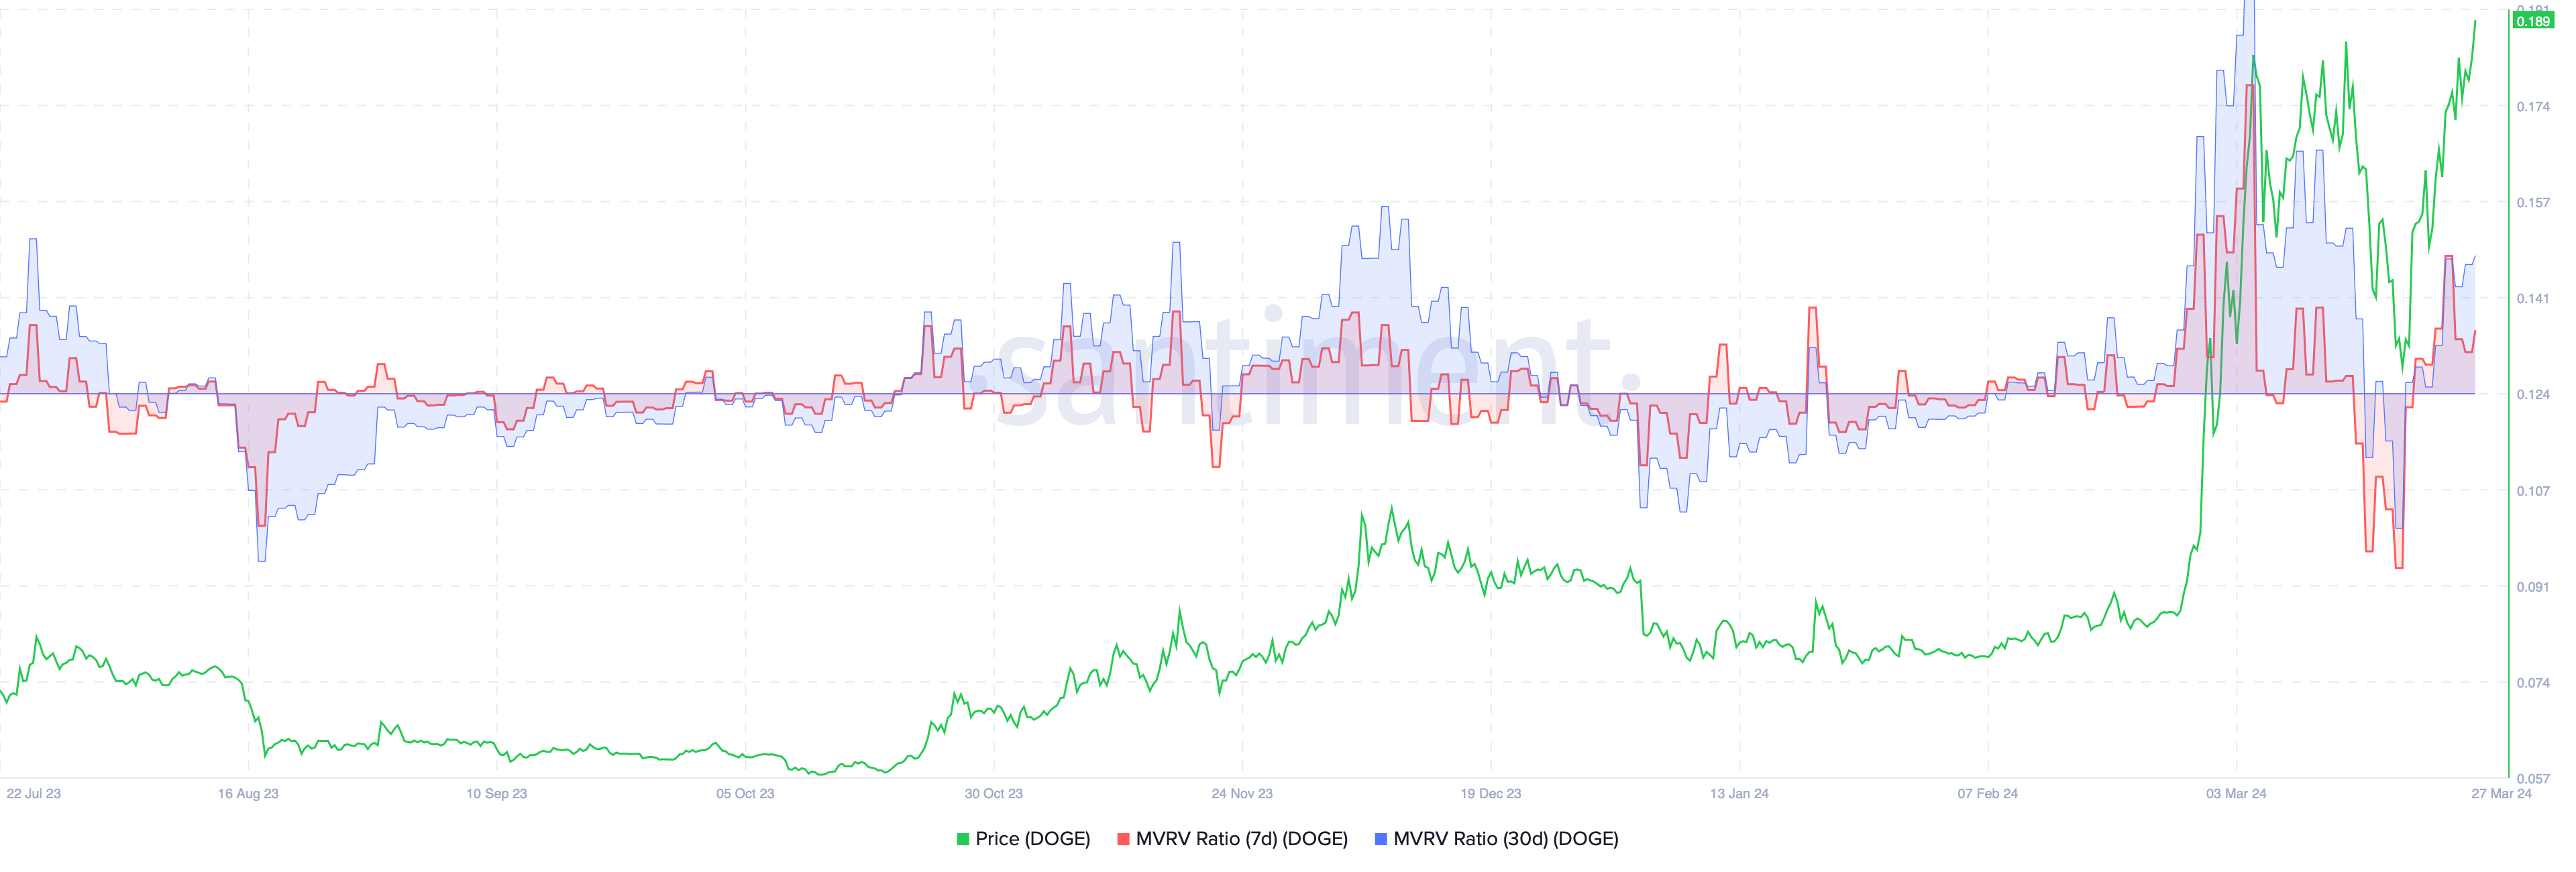 DOGE 7-day and 30-day MVRV ratio